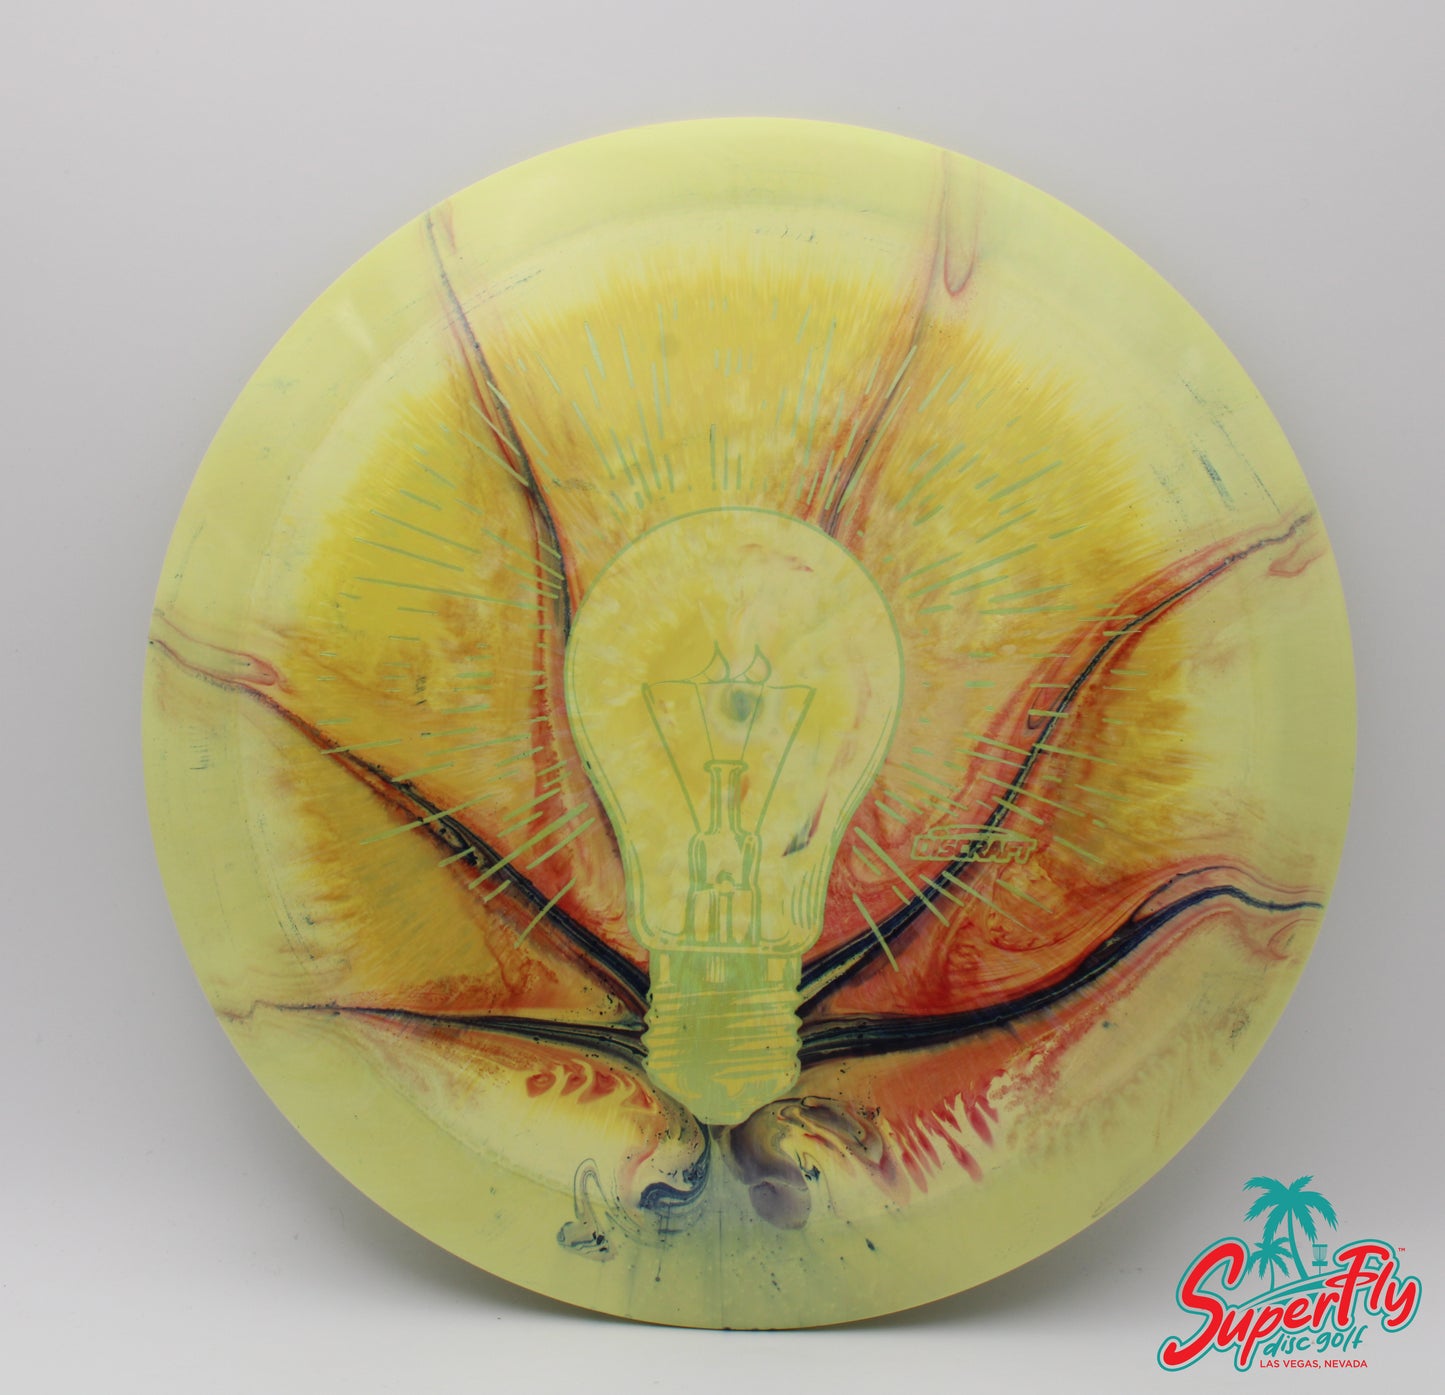 Keith Howells Dyed Discs